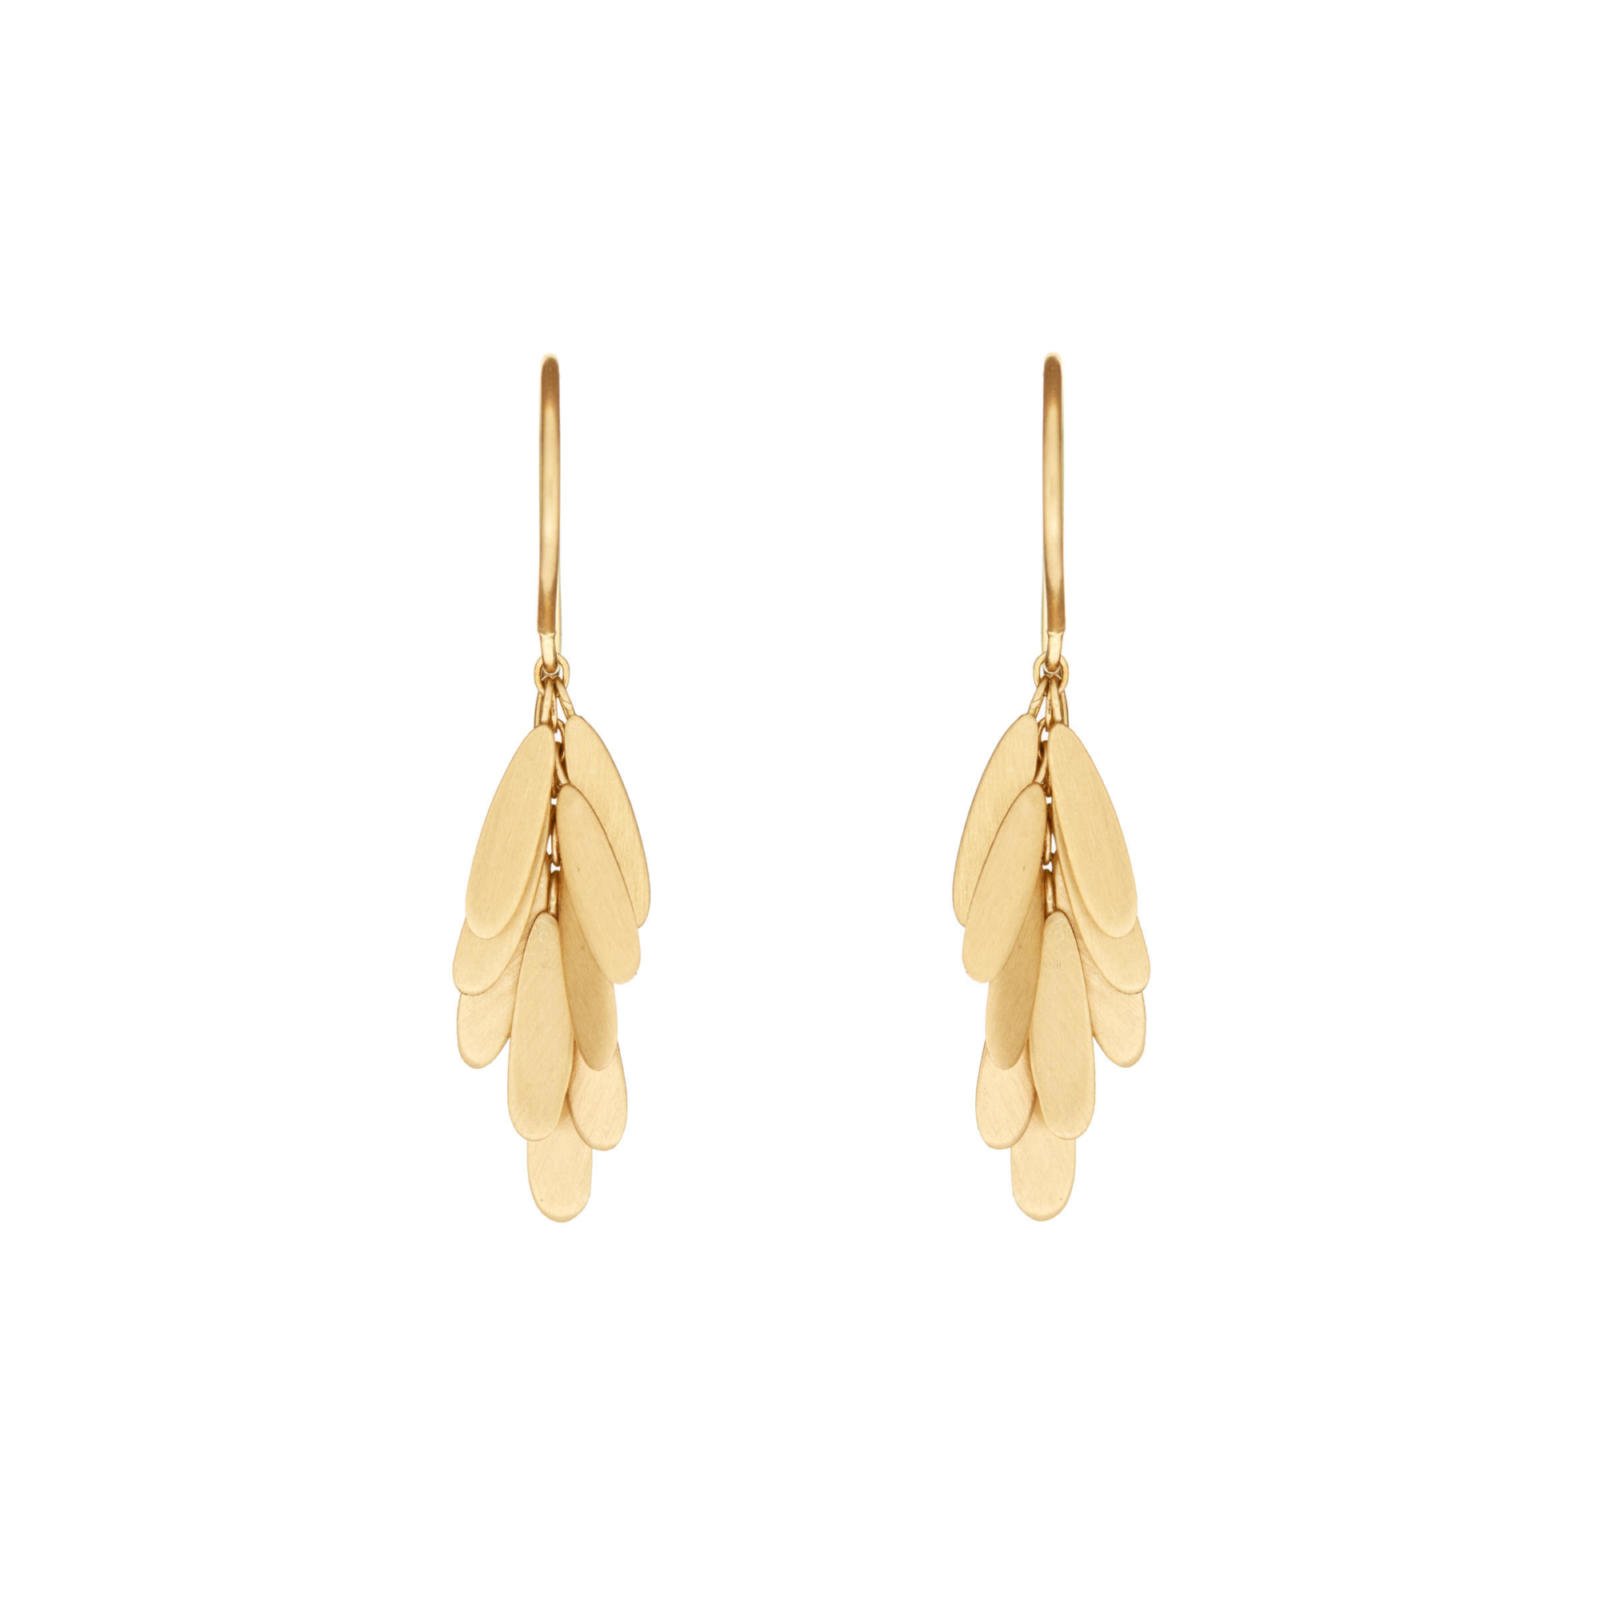 Sia Taylor ME15 Y Yellow Gold Earrings WB